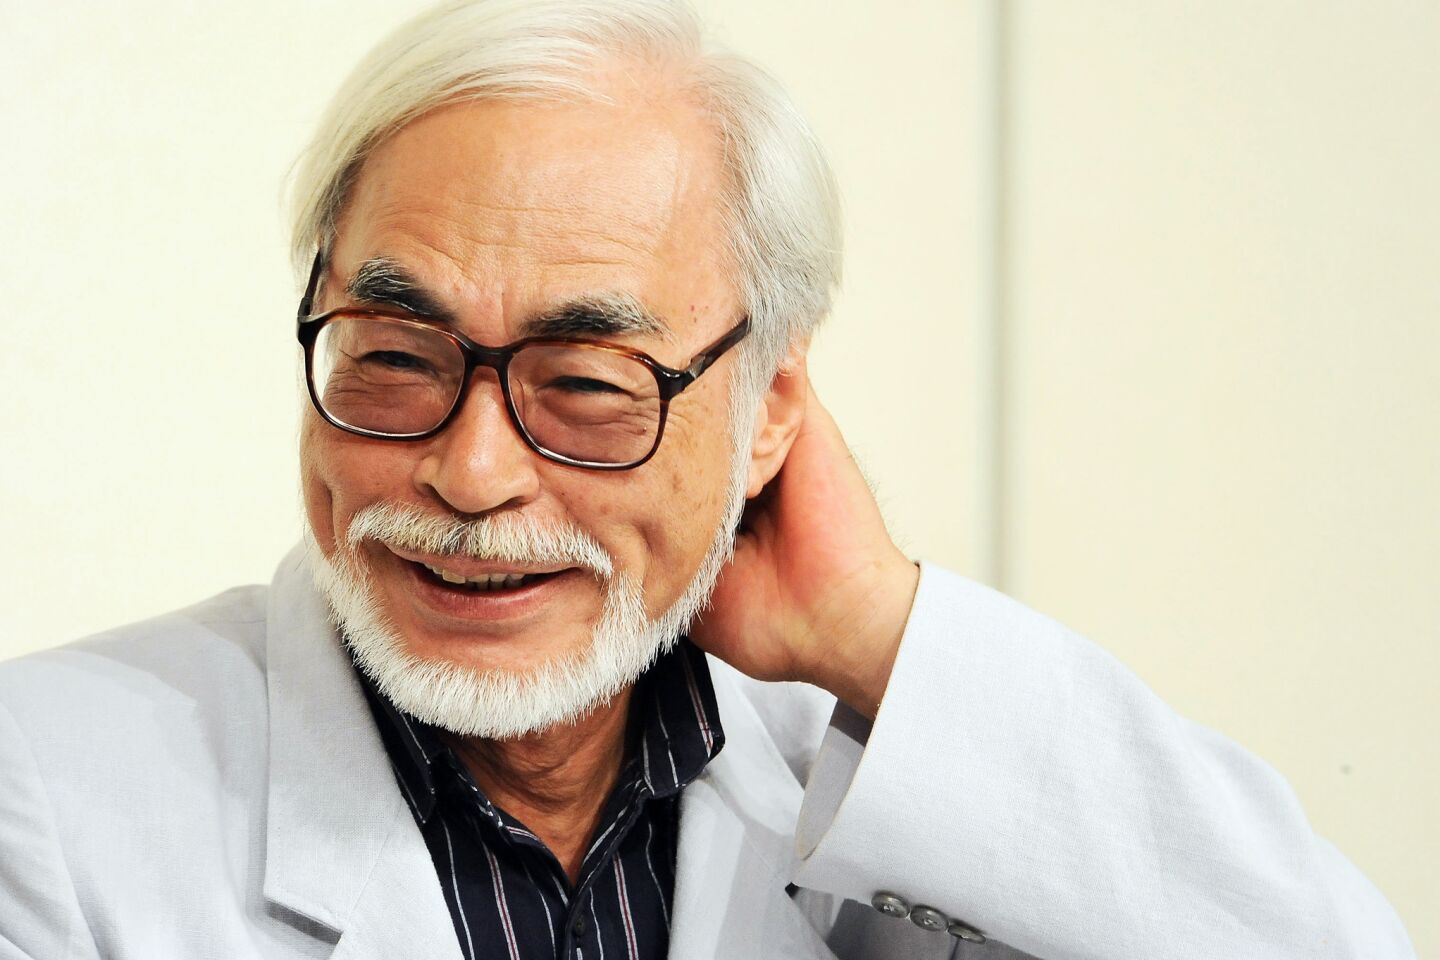 Retired animator-director Hayao Miyazaki's visual and written style, often infusing stories with spirits and beings brought forth from nature, have worldwide appeal. Here are just a few of the more popular films that he had a hand in either directing or writing.